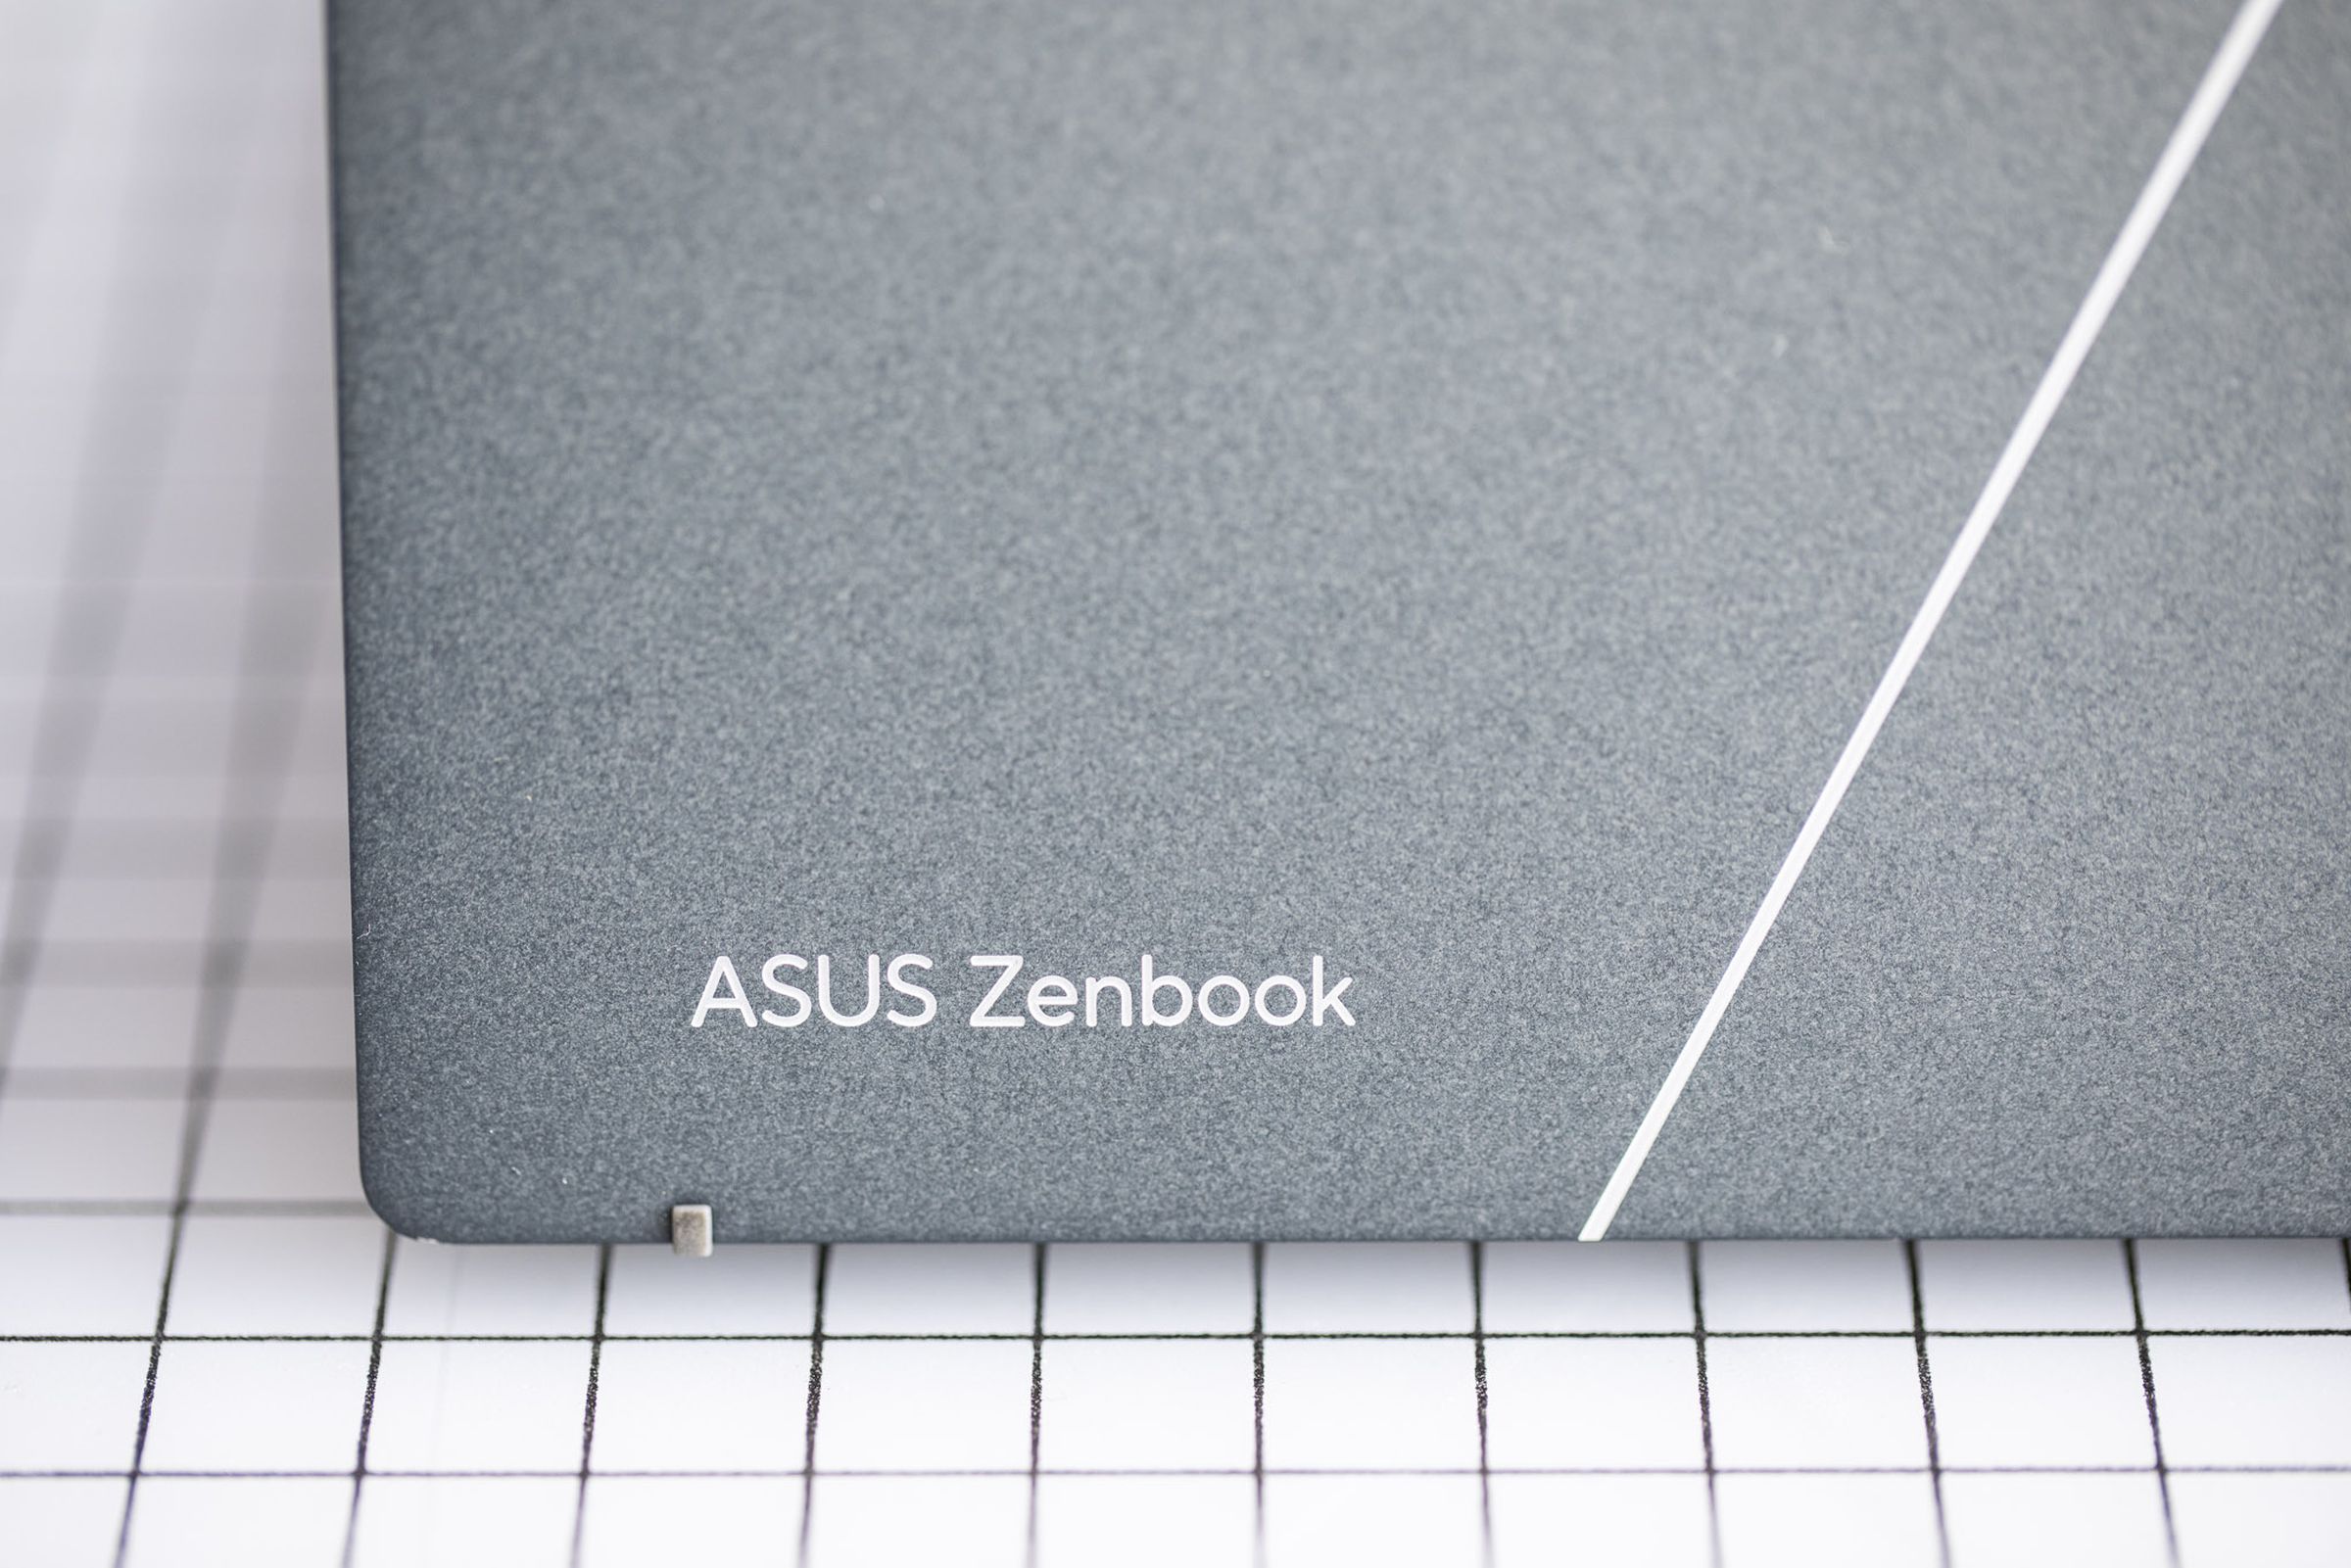 The Asus Zenbook logo on the lid of the Zenbook S 13 OLED.